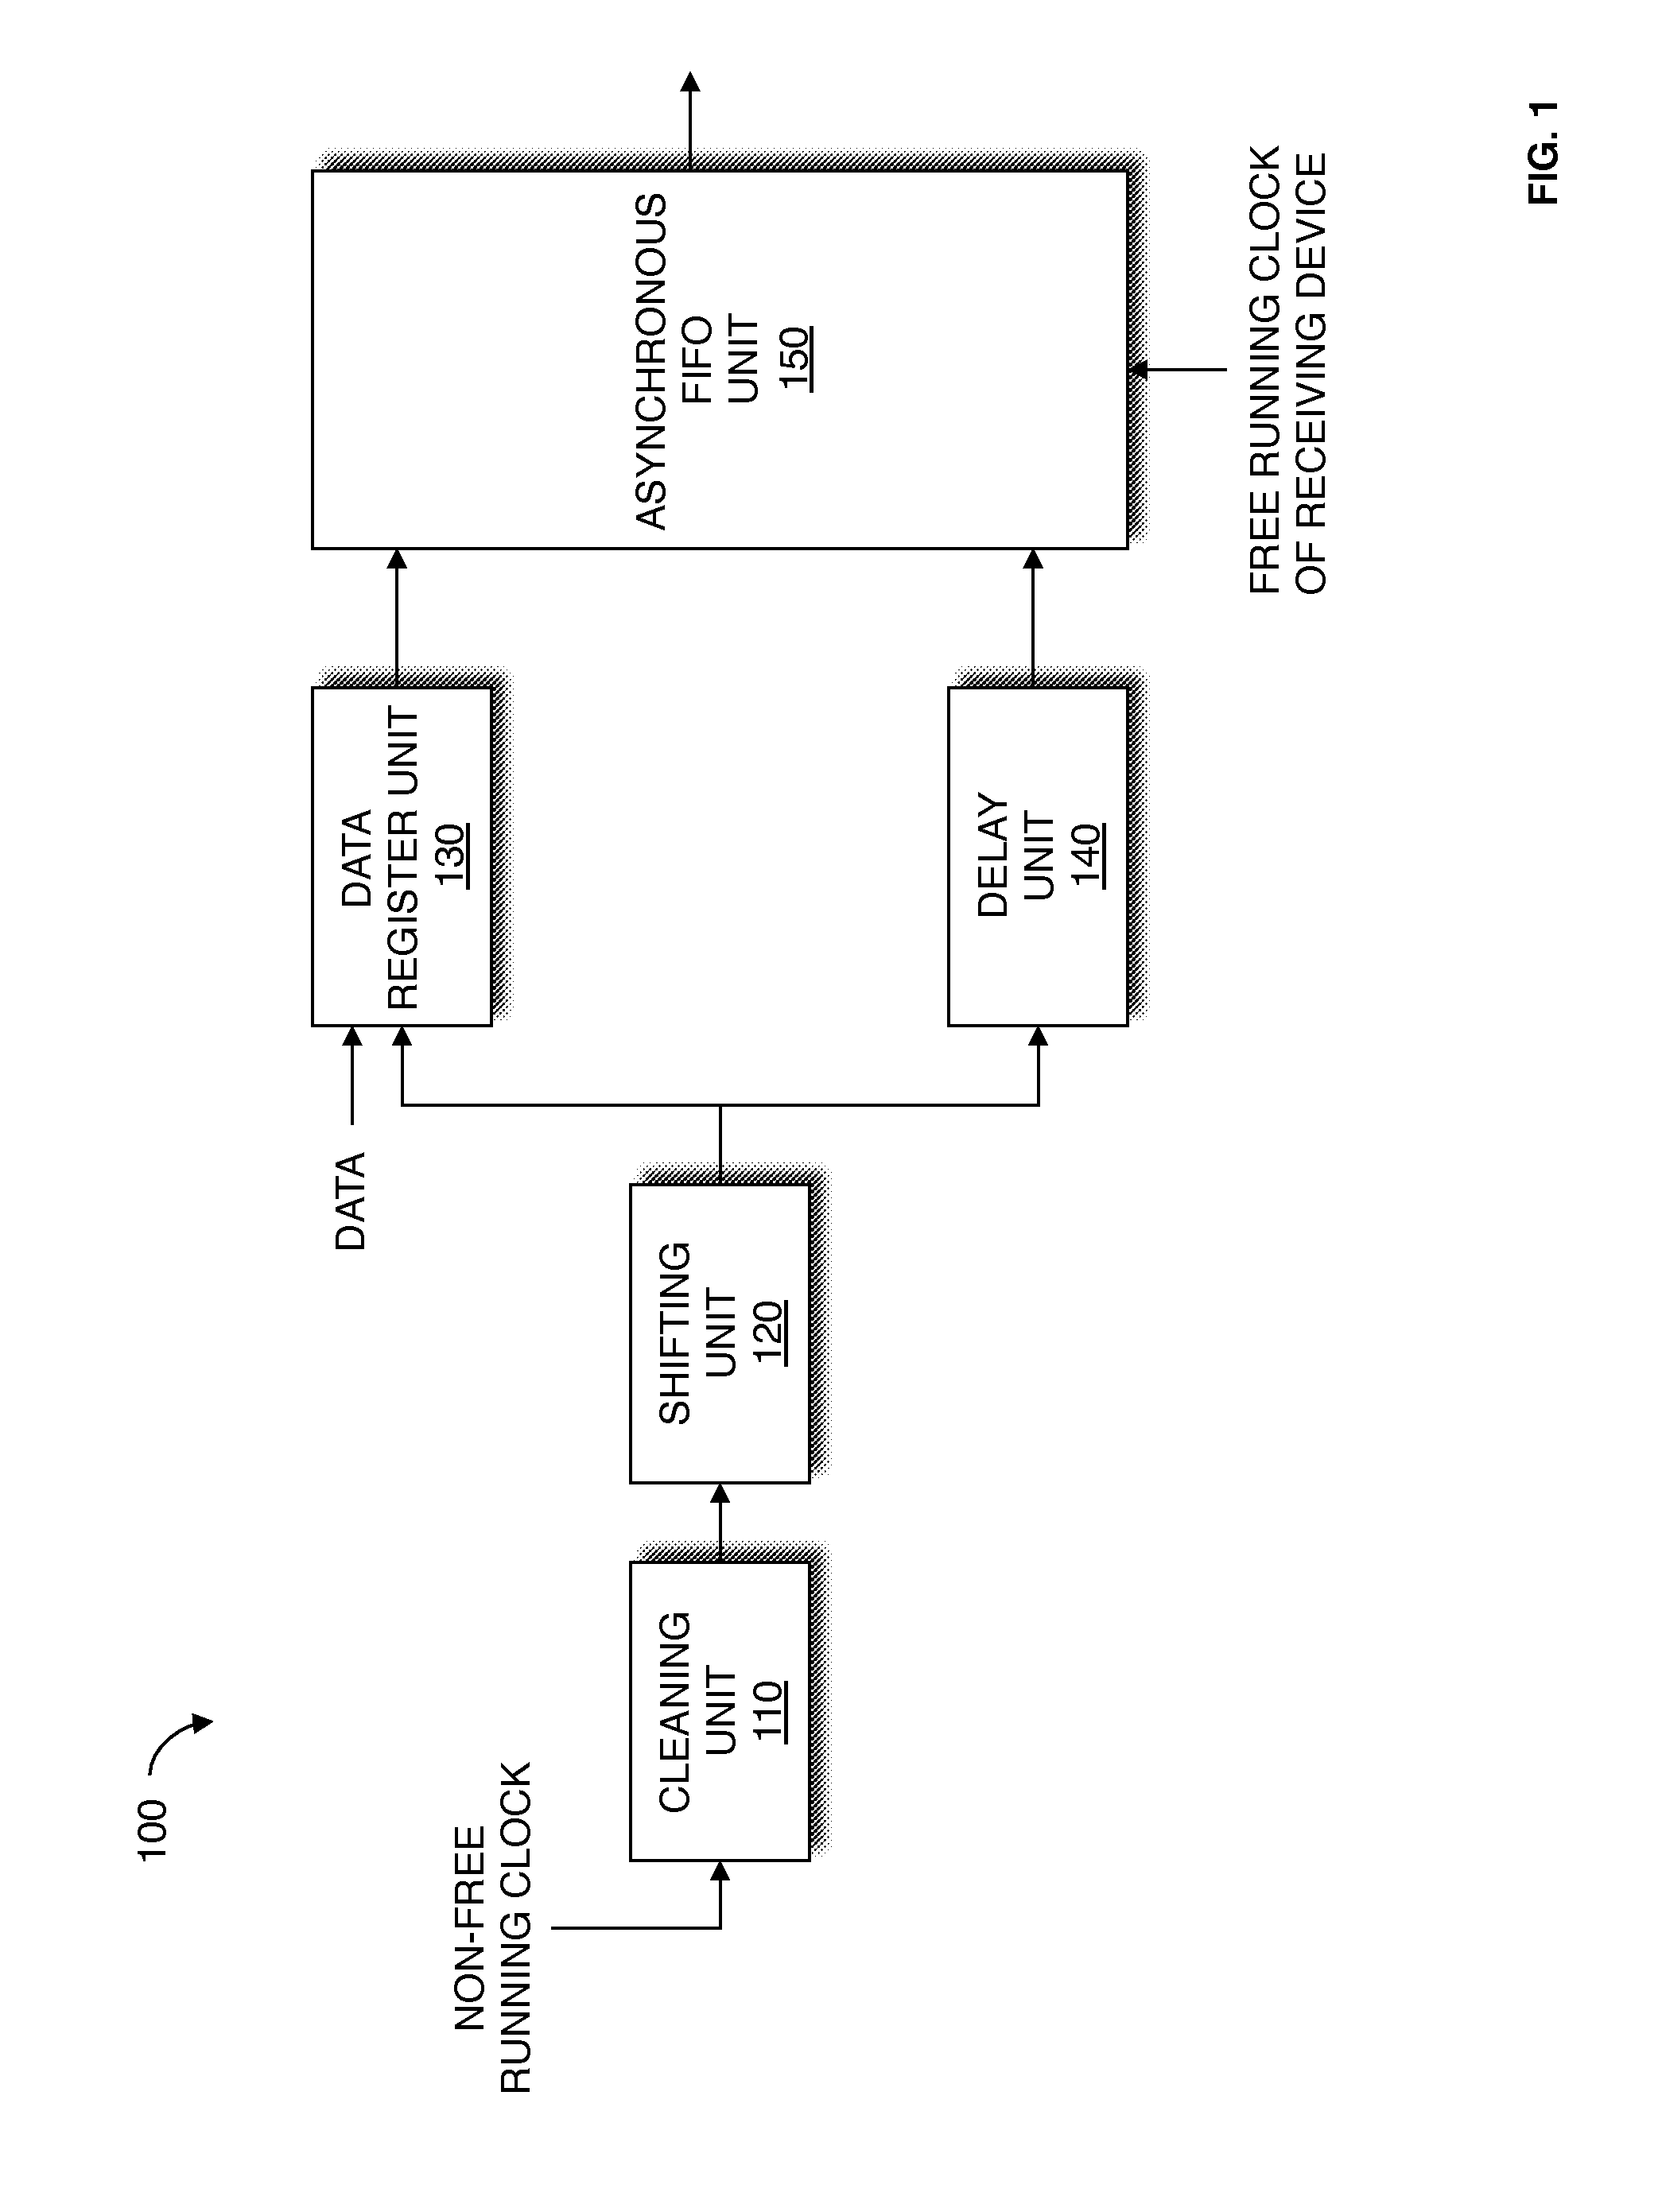 Method and apparatus for strobe-based source-synchronous capture using a first-in-first-out unit